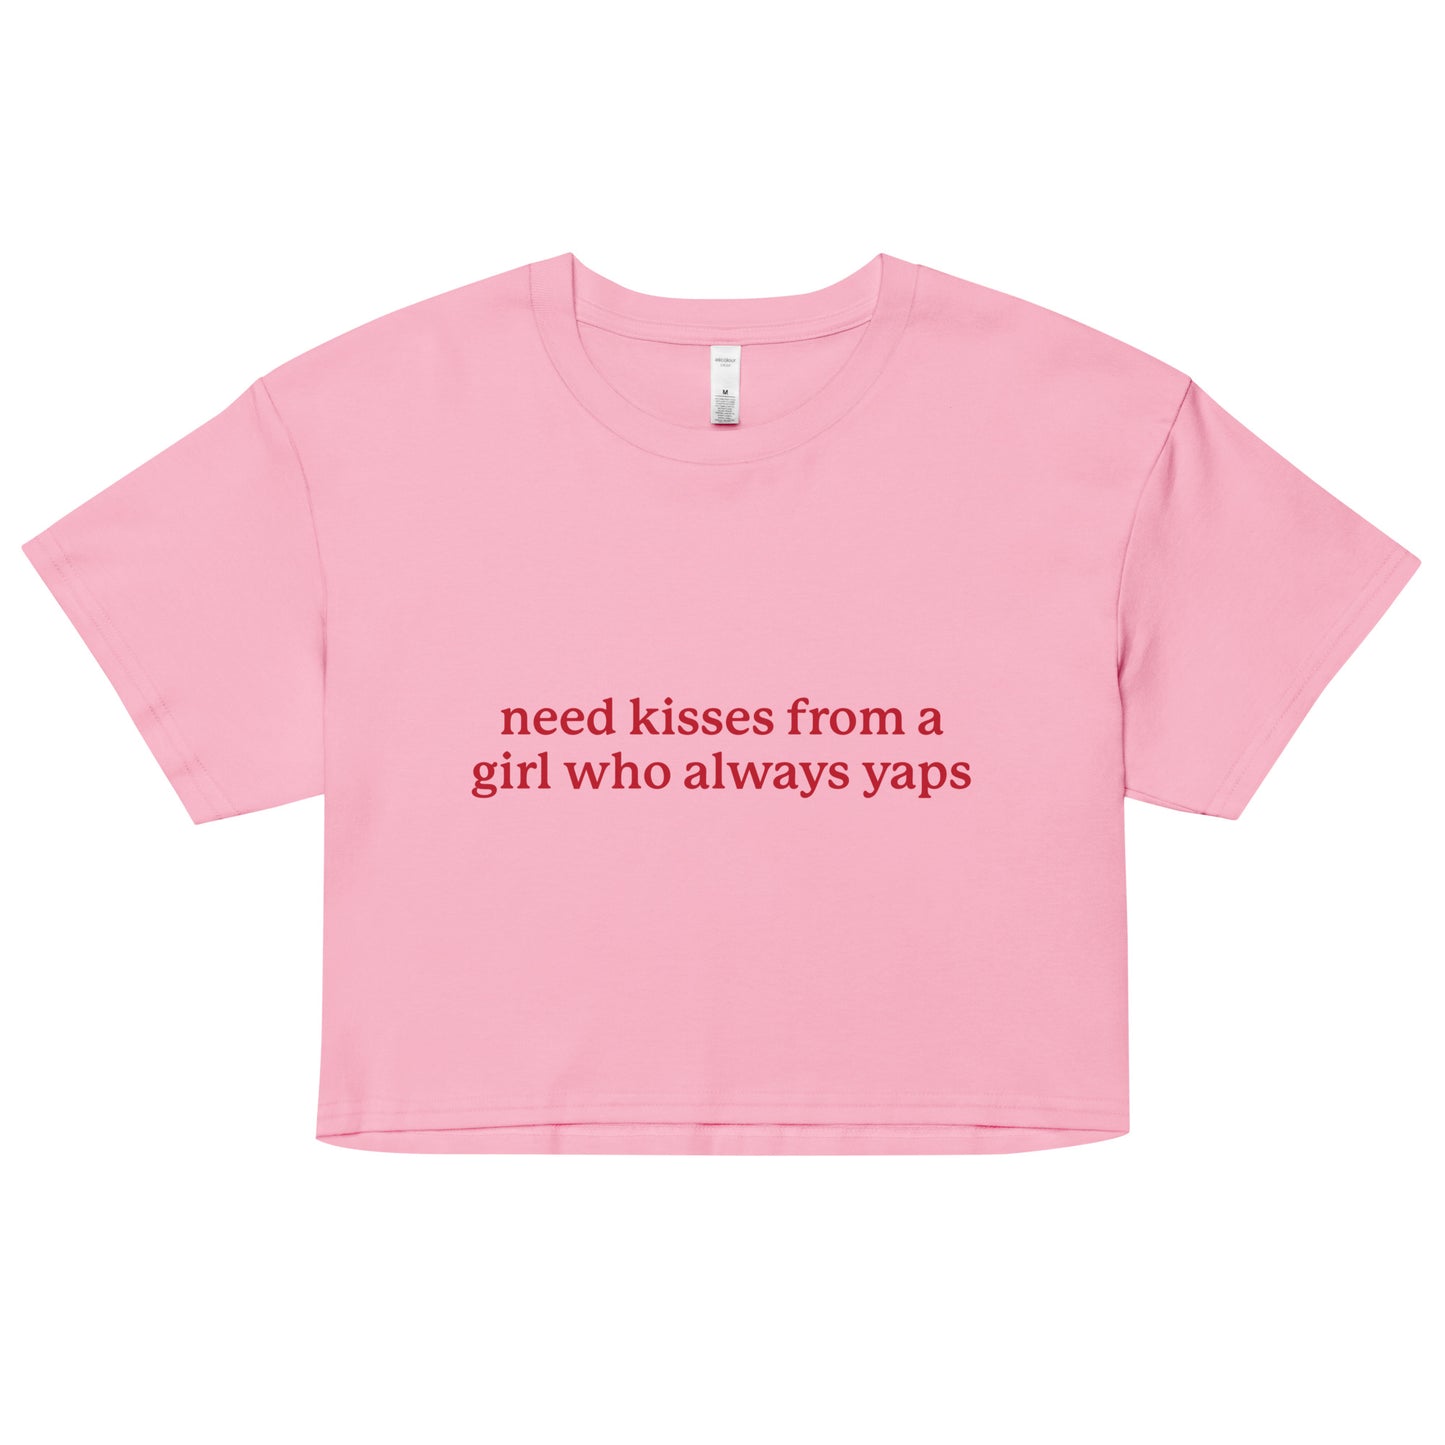 Need Kisses From a Girl Who Always Yaps crop top